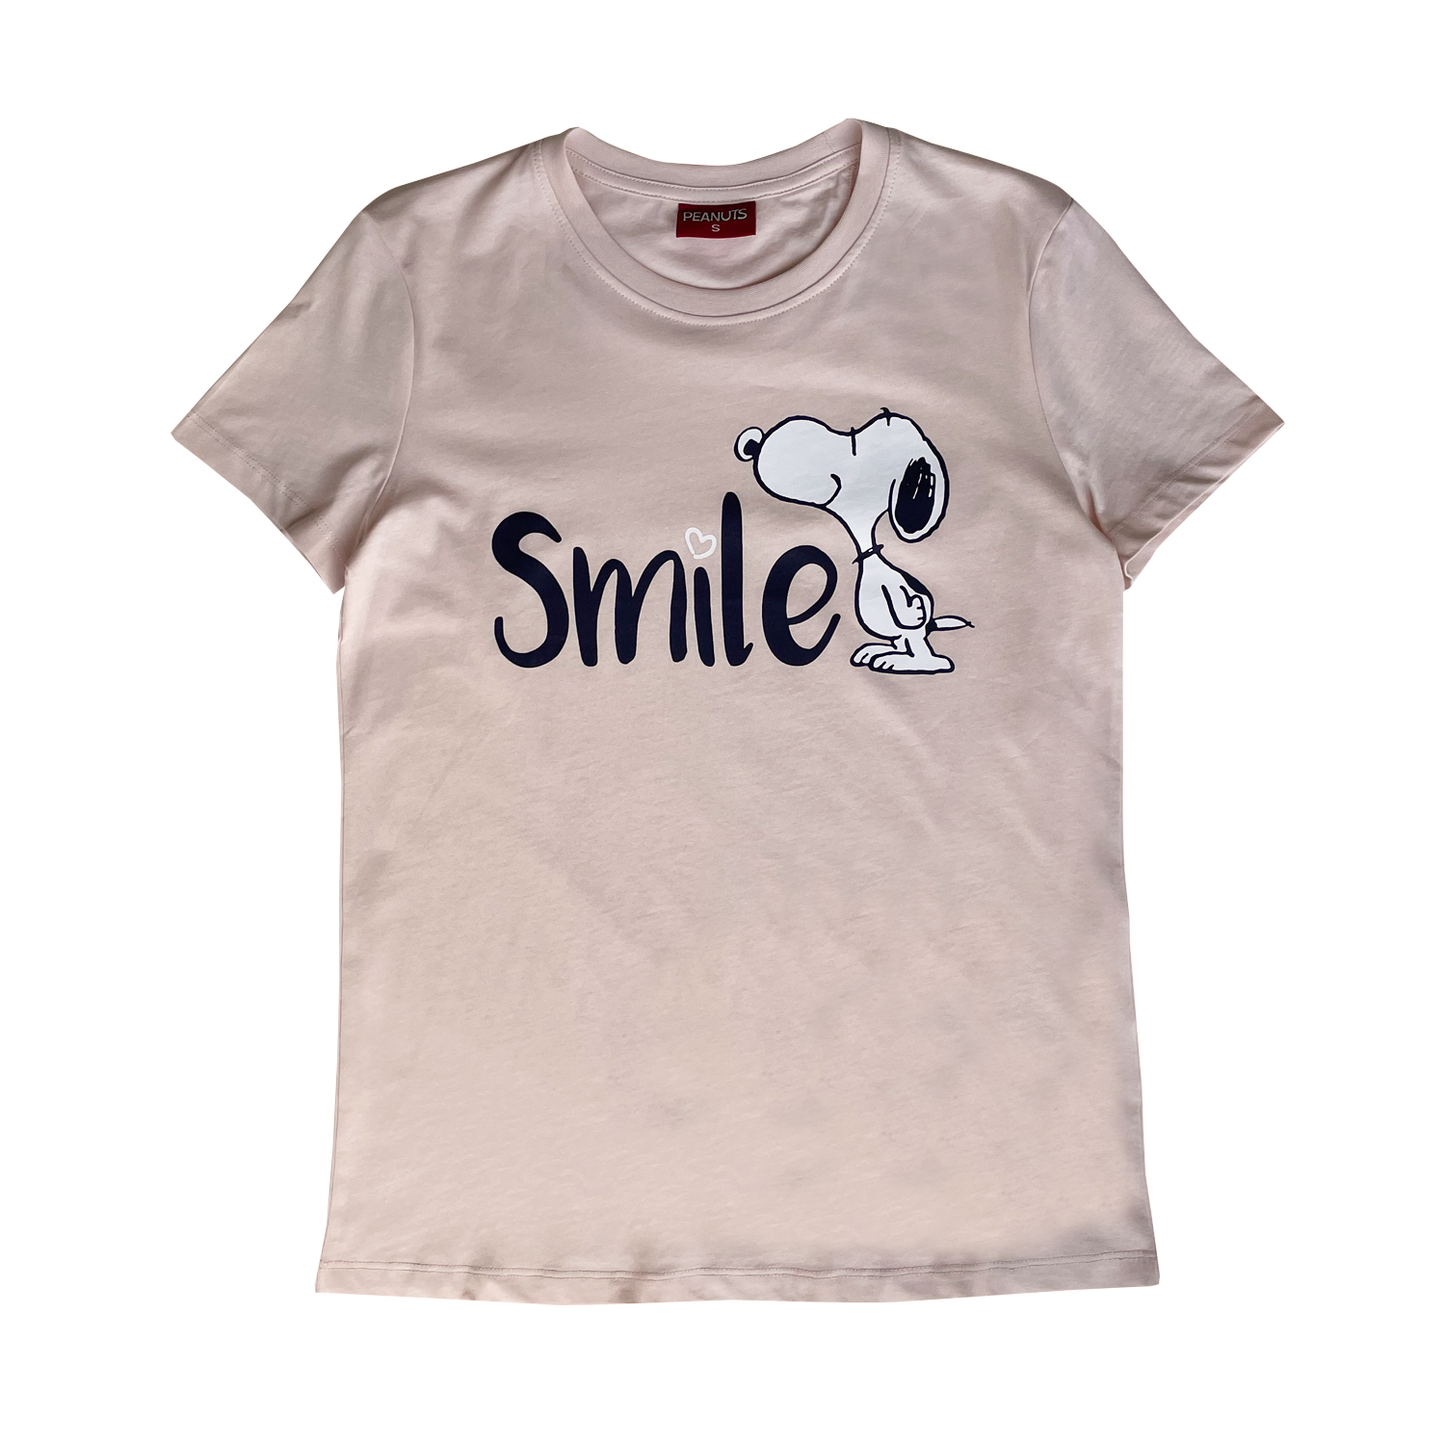 - Smile – T-Shirt Peanuts Snoopy